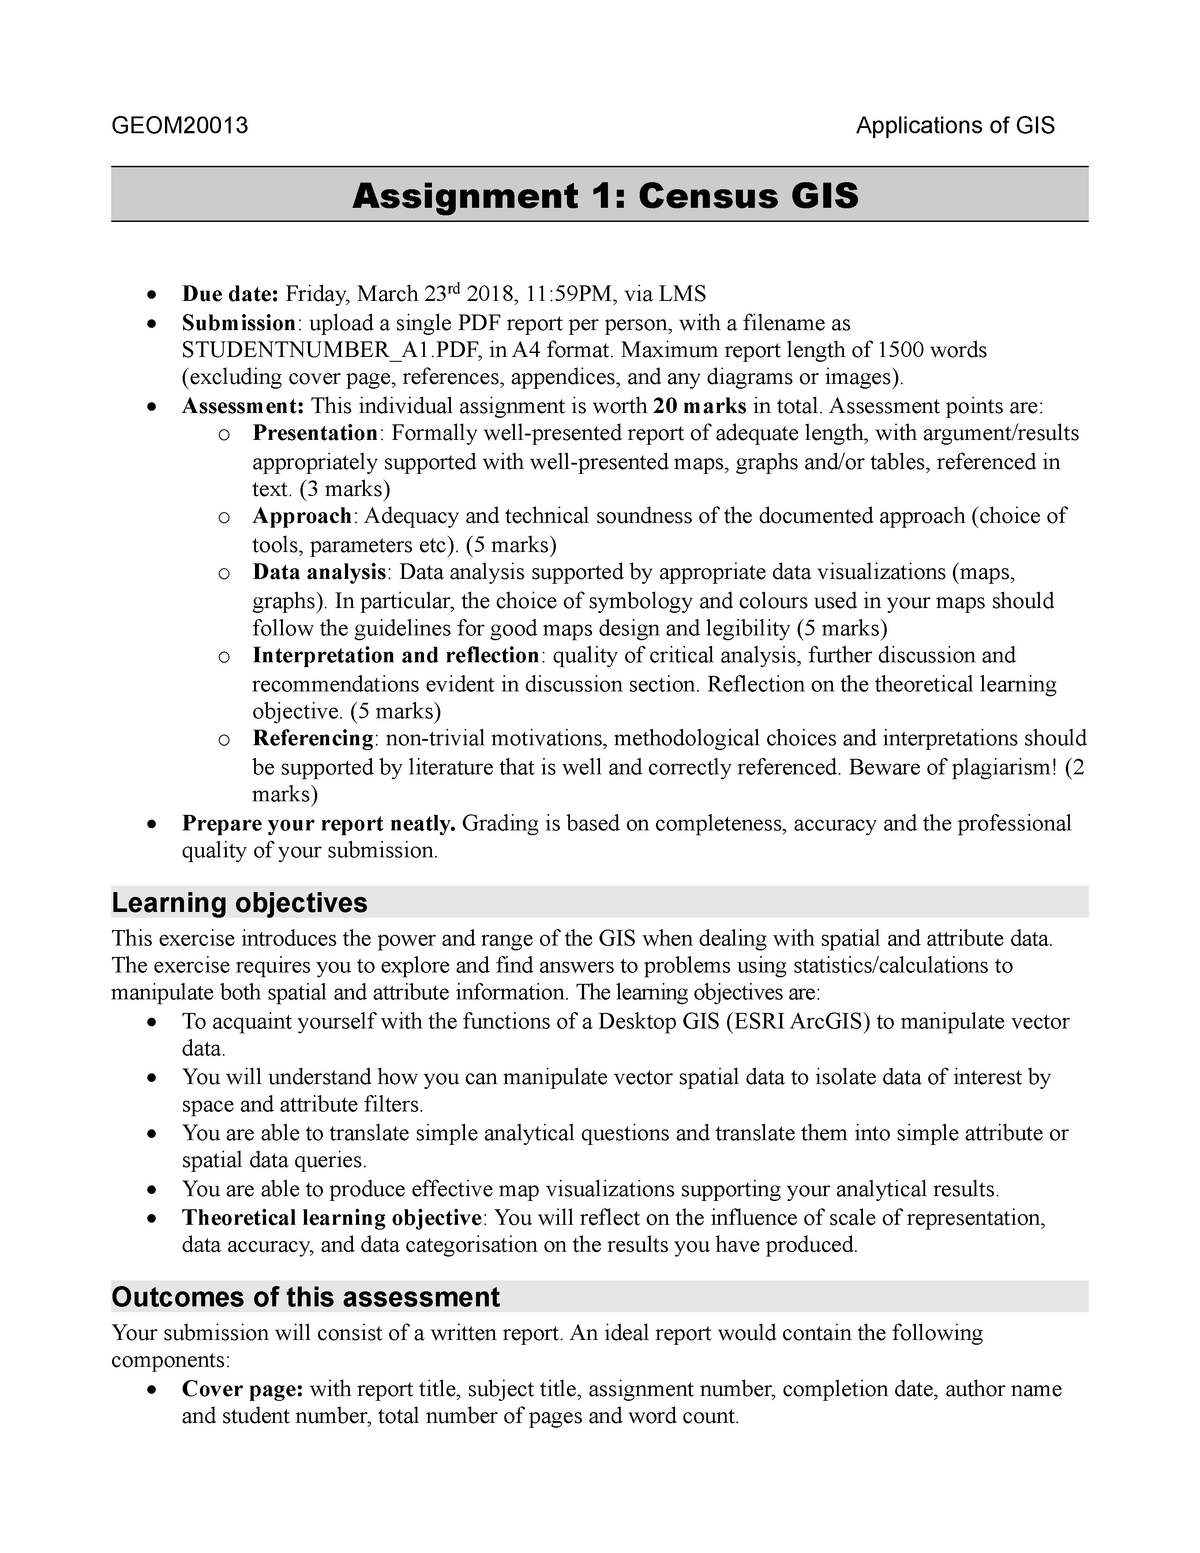 geom2001-3-a1-description-geom20013-applications-of-gis-assignment-1-census-gis-due-date